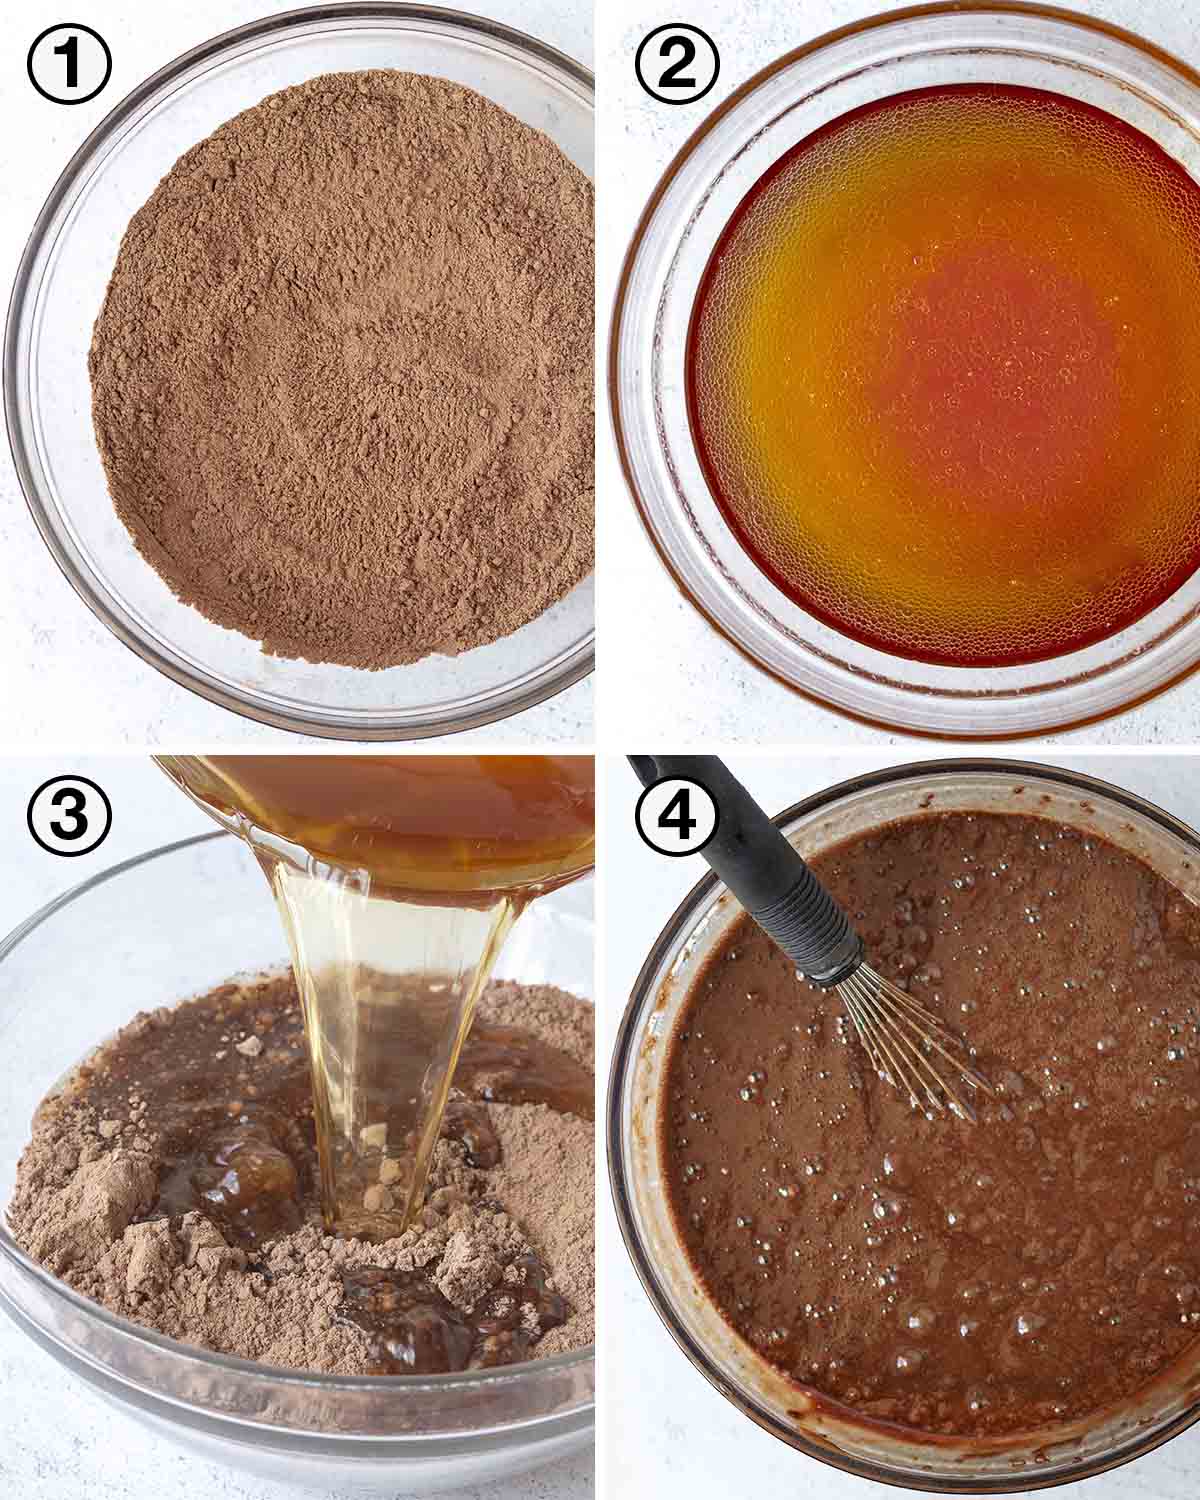 A collage of four images showing the sequence of steps needed to make vegan gluten-free chocolate cake batter.